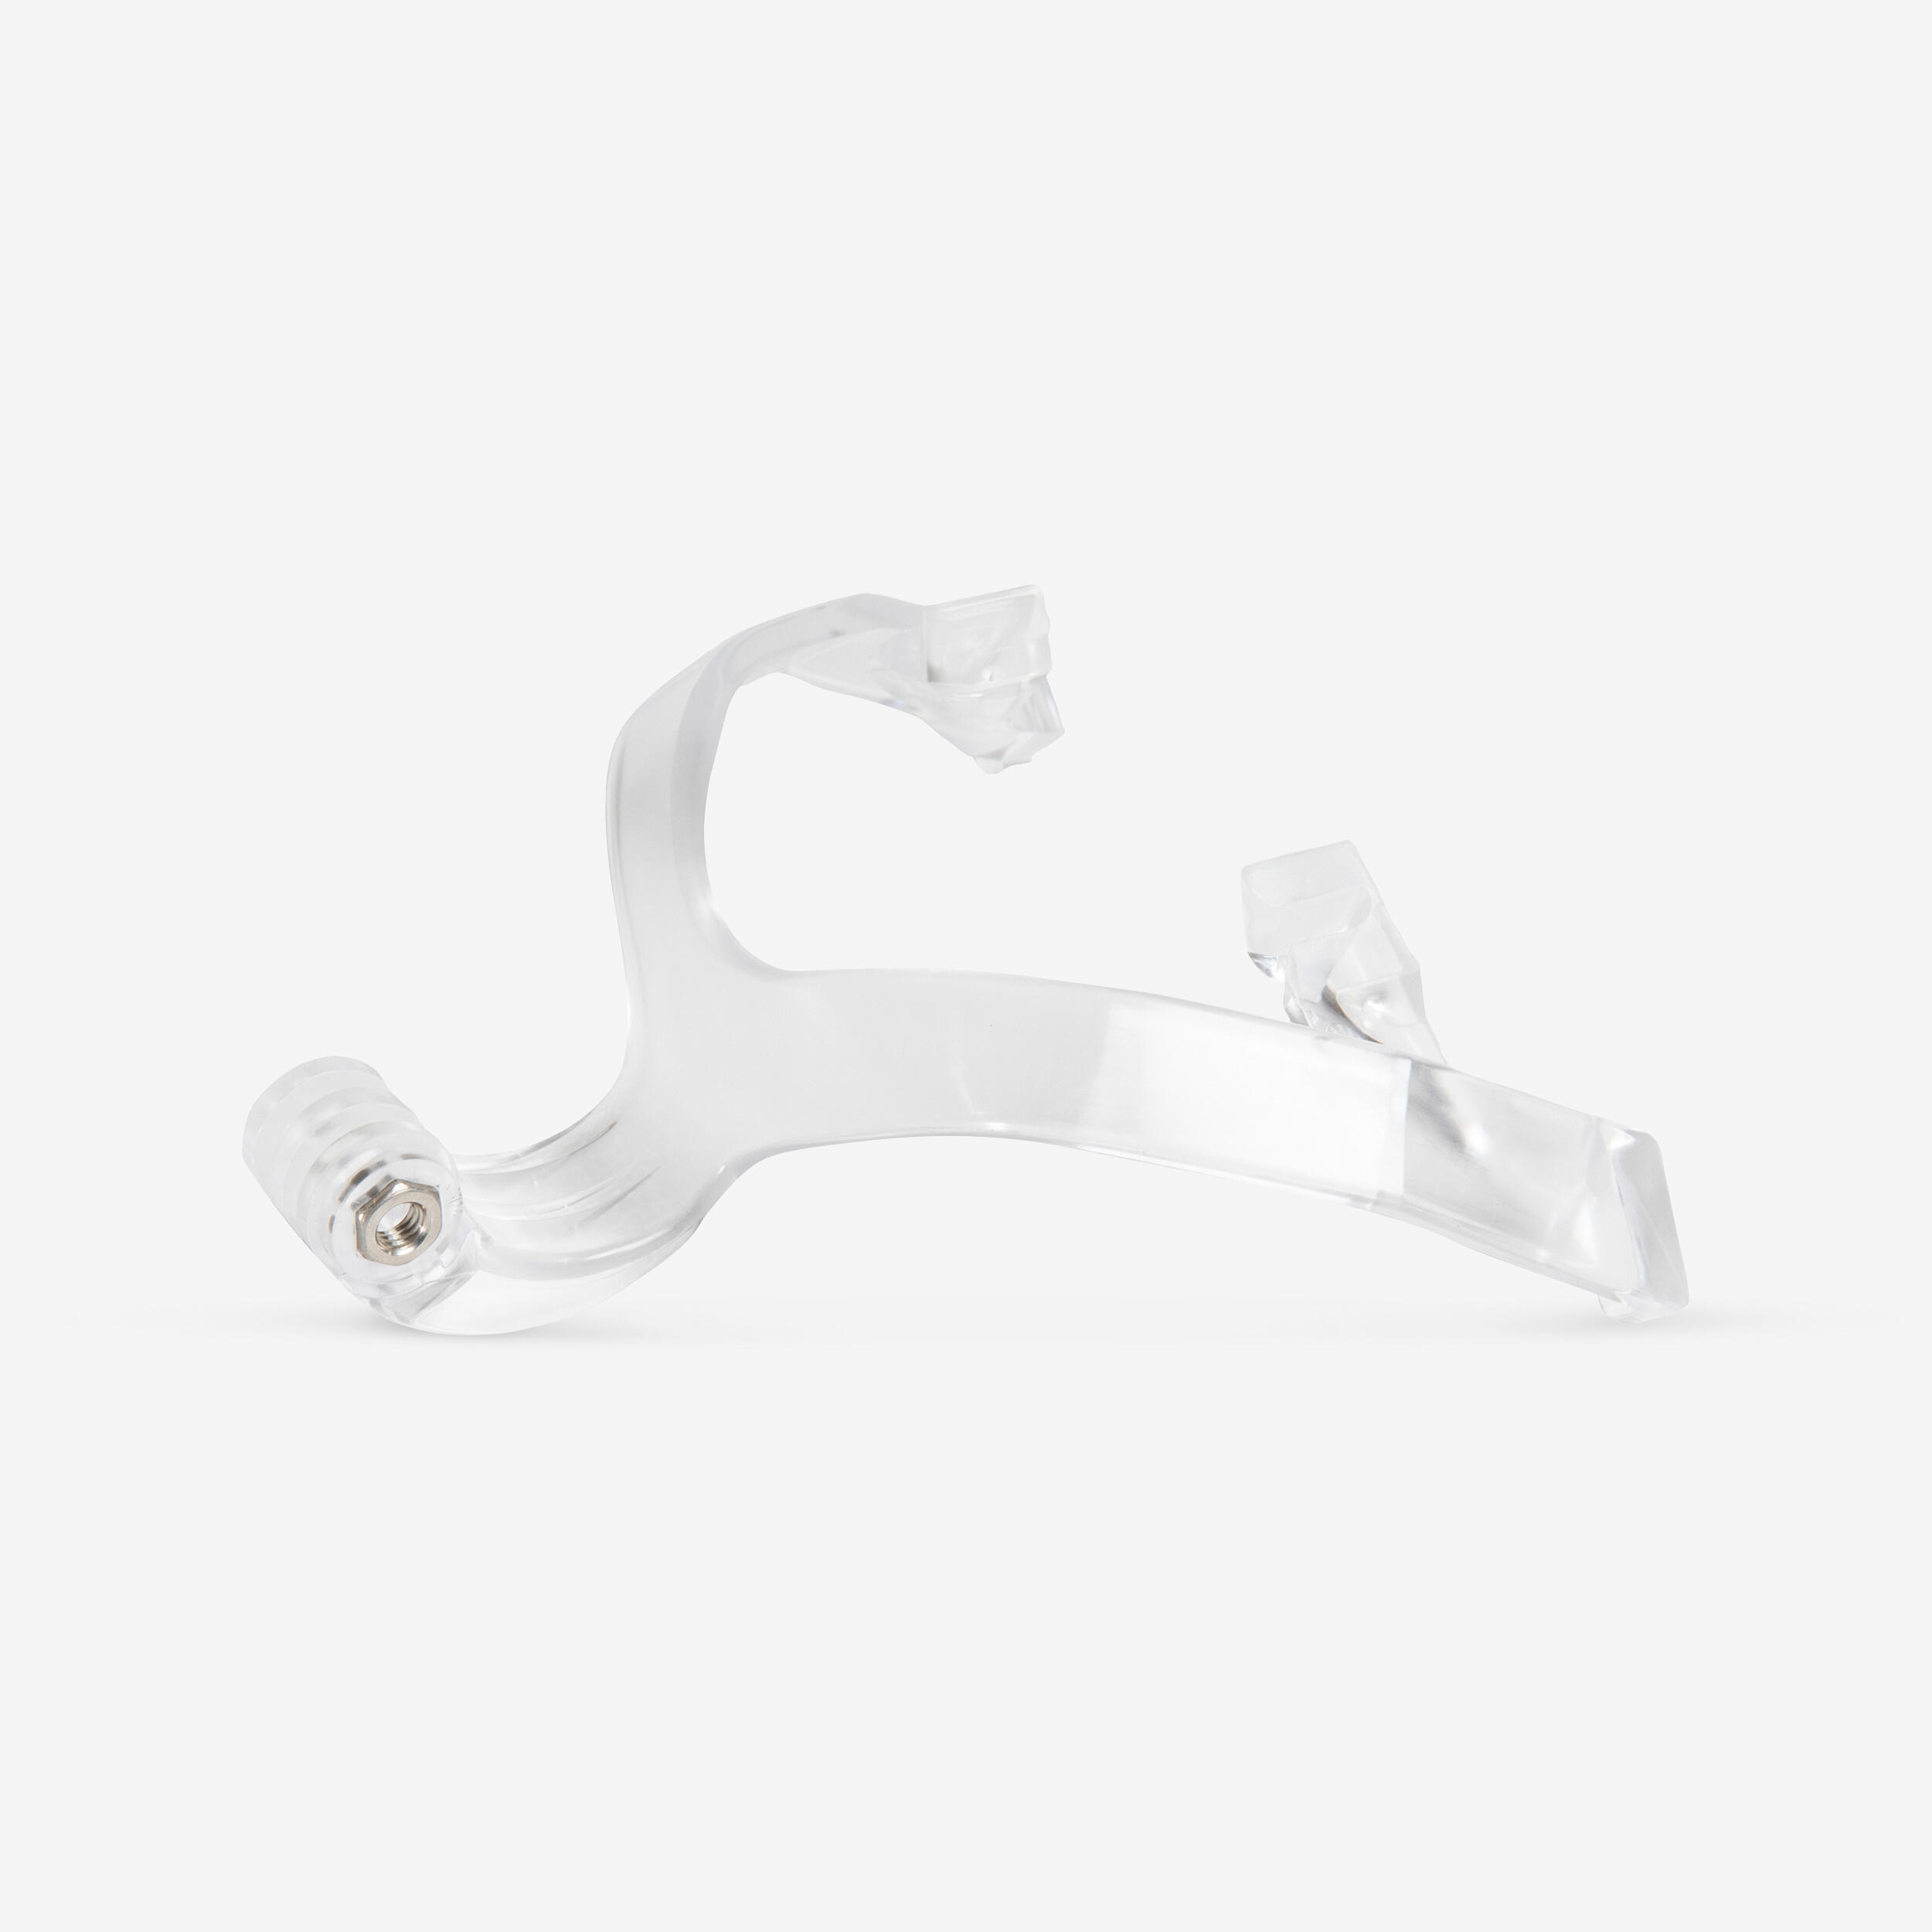 Camera mount for the Easybreath Snorkelling mask 1/1